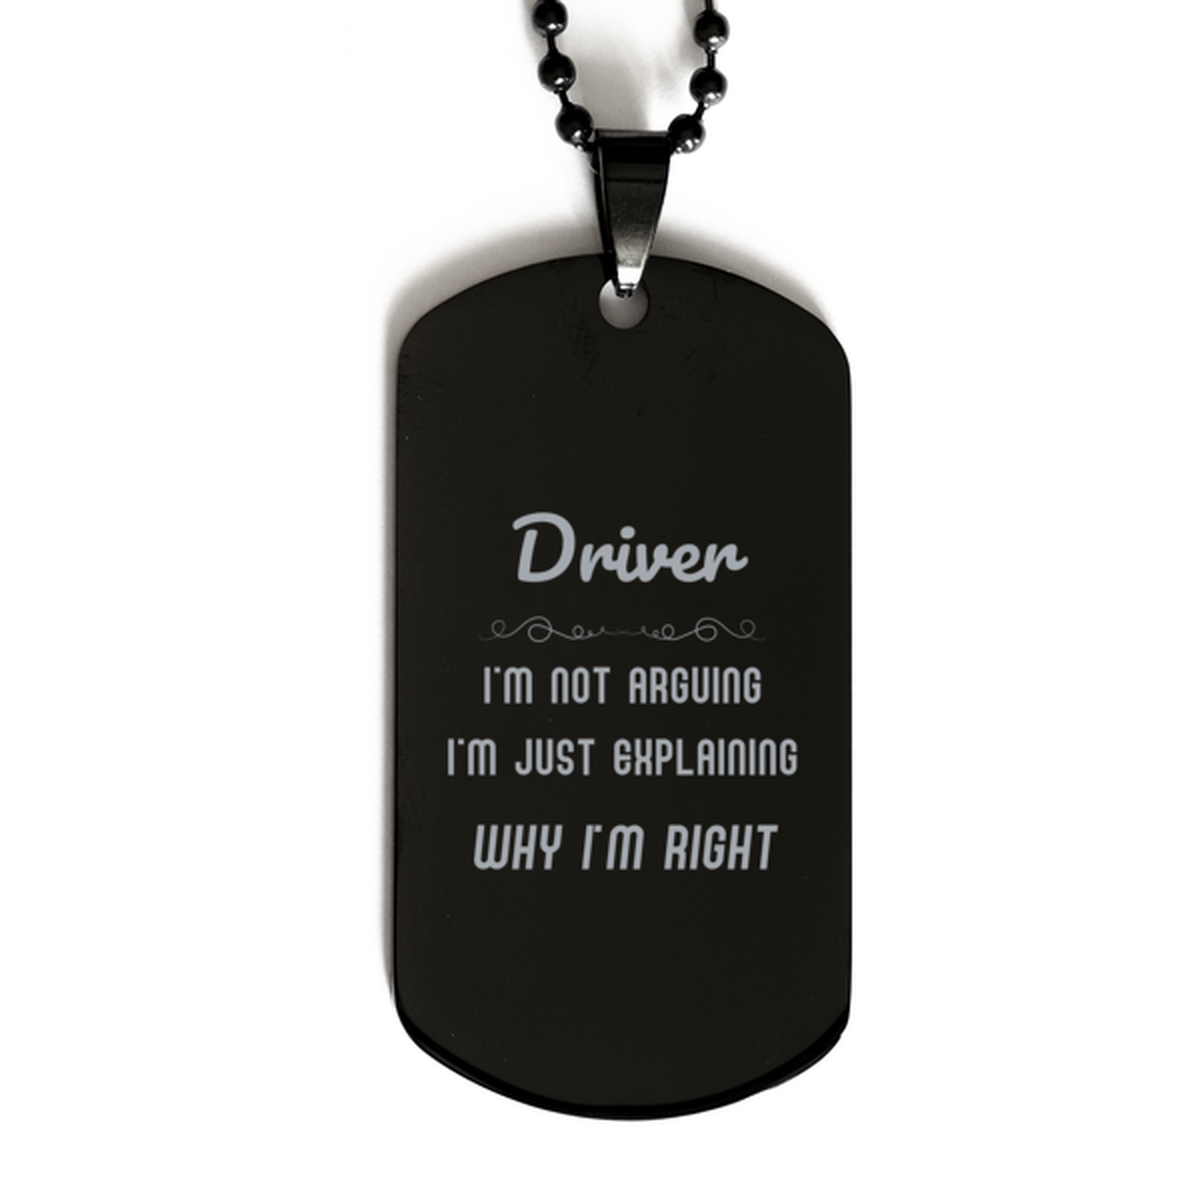 Driver I'm not Arguing. I'm Just Explaining Why I'm RIGHT Black Dog Tag, Funny Saying Quote Driver Gifts For Driver Graduation Birthday Christmas Gifts for Men Women Coworker